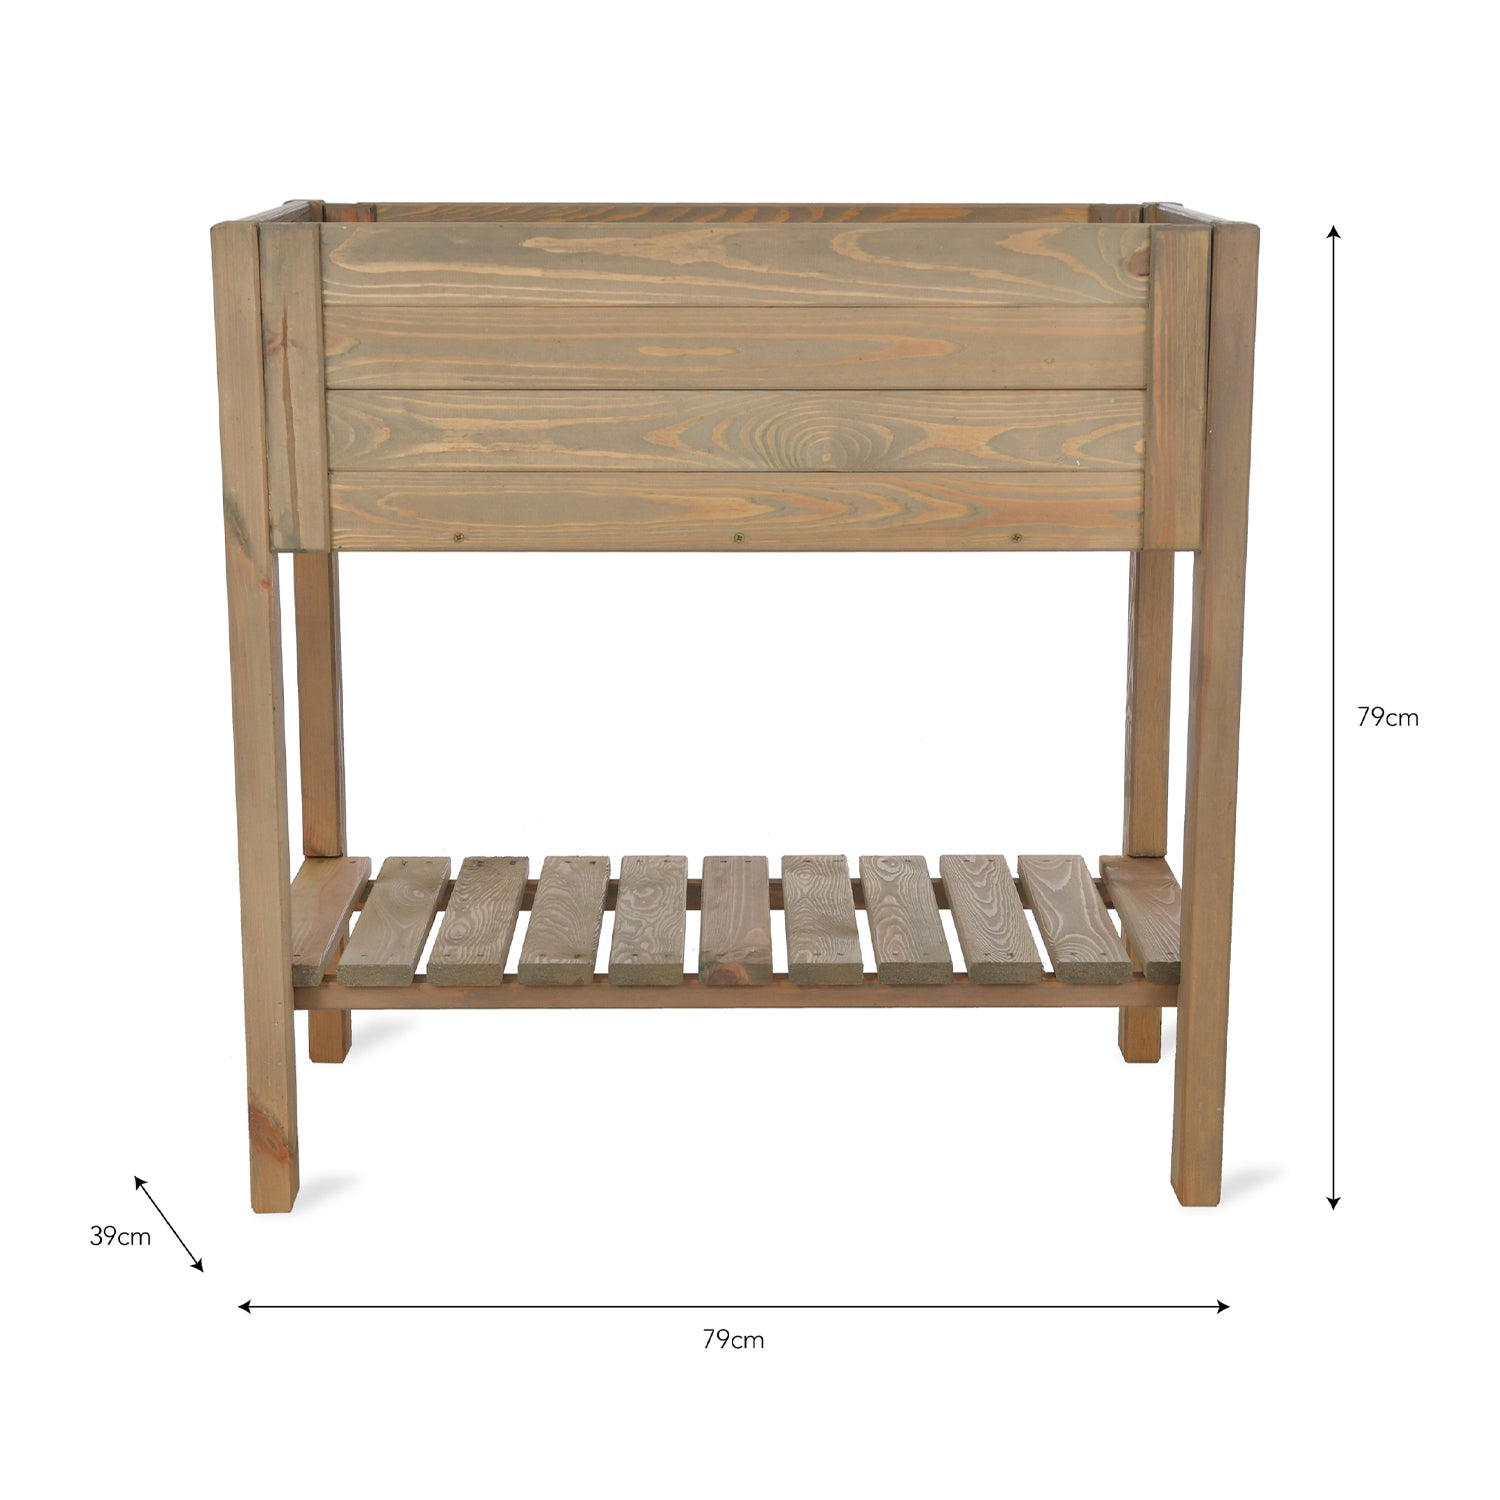 Foxmore Raised Planter 39cm Pine by Garden Trading